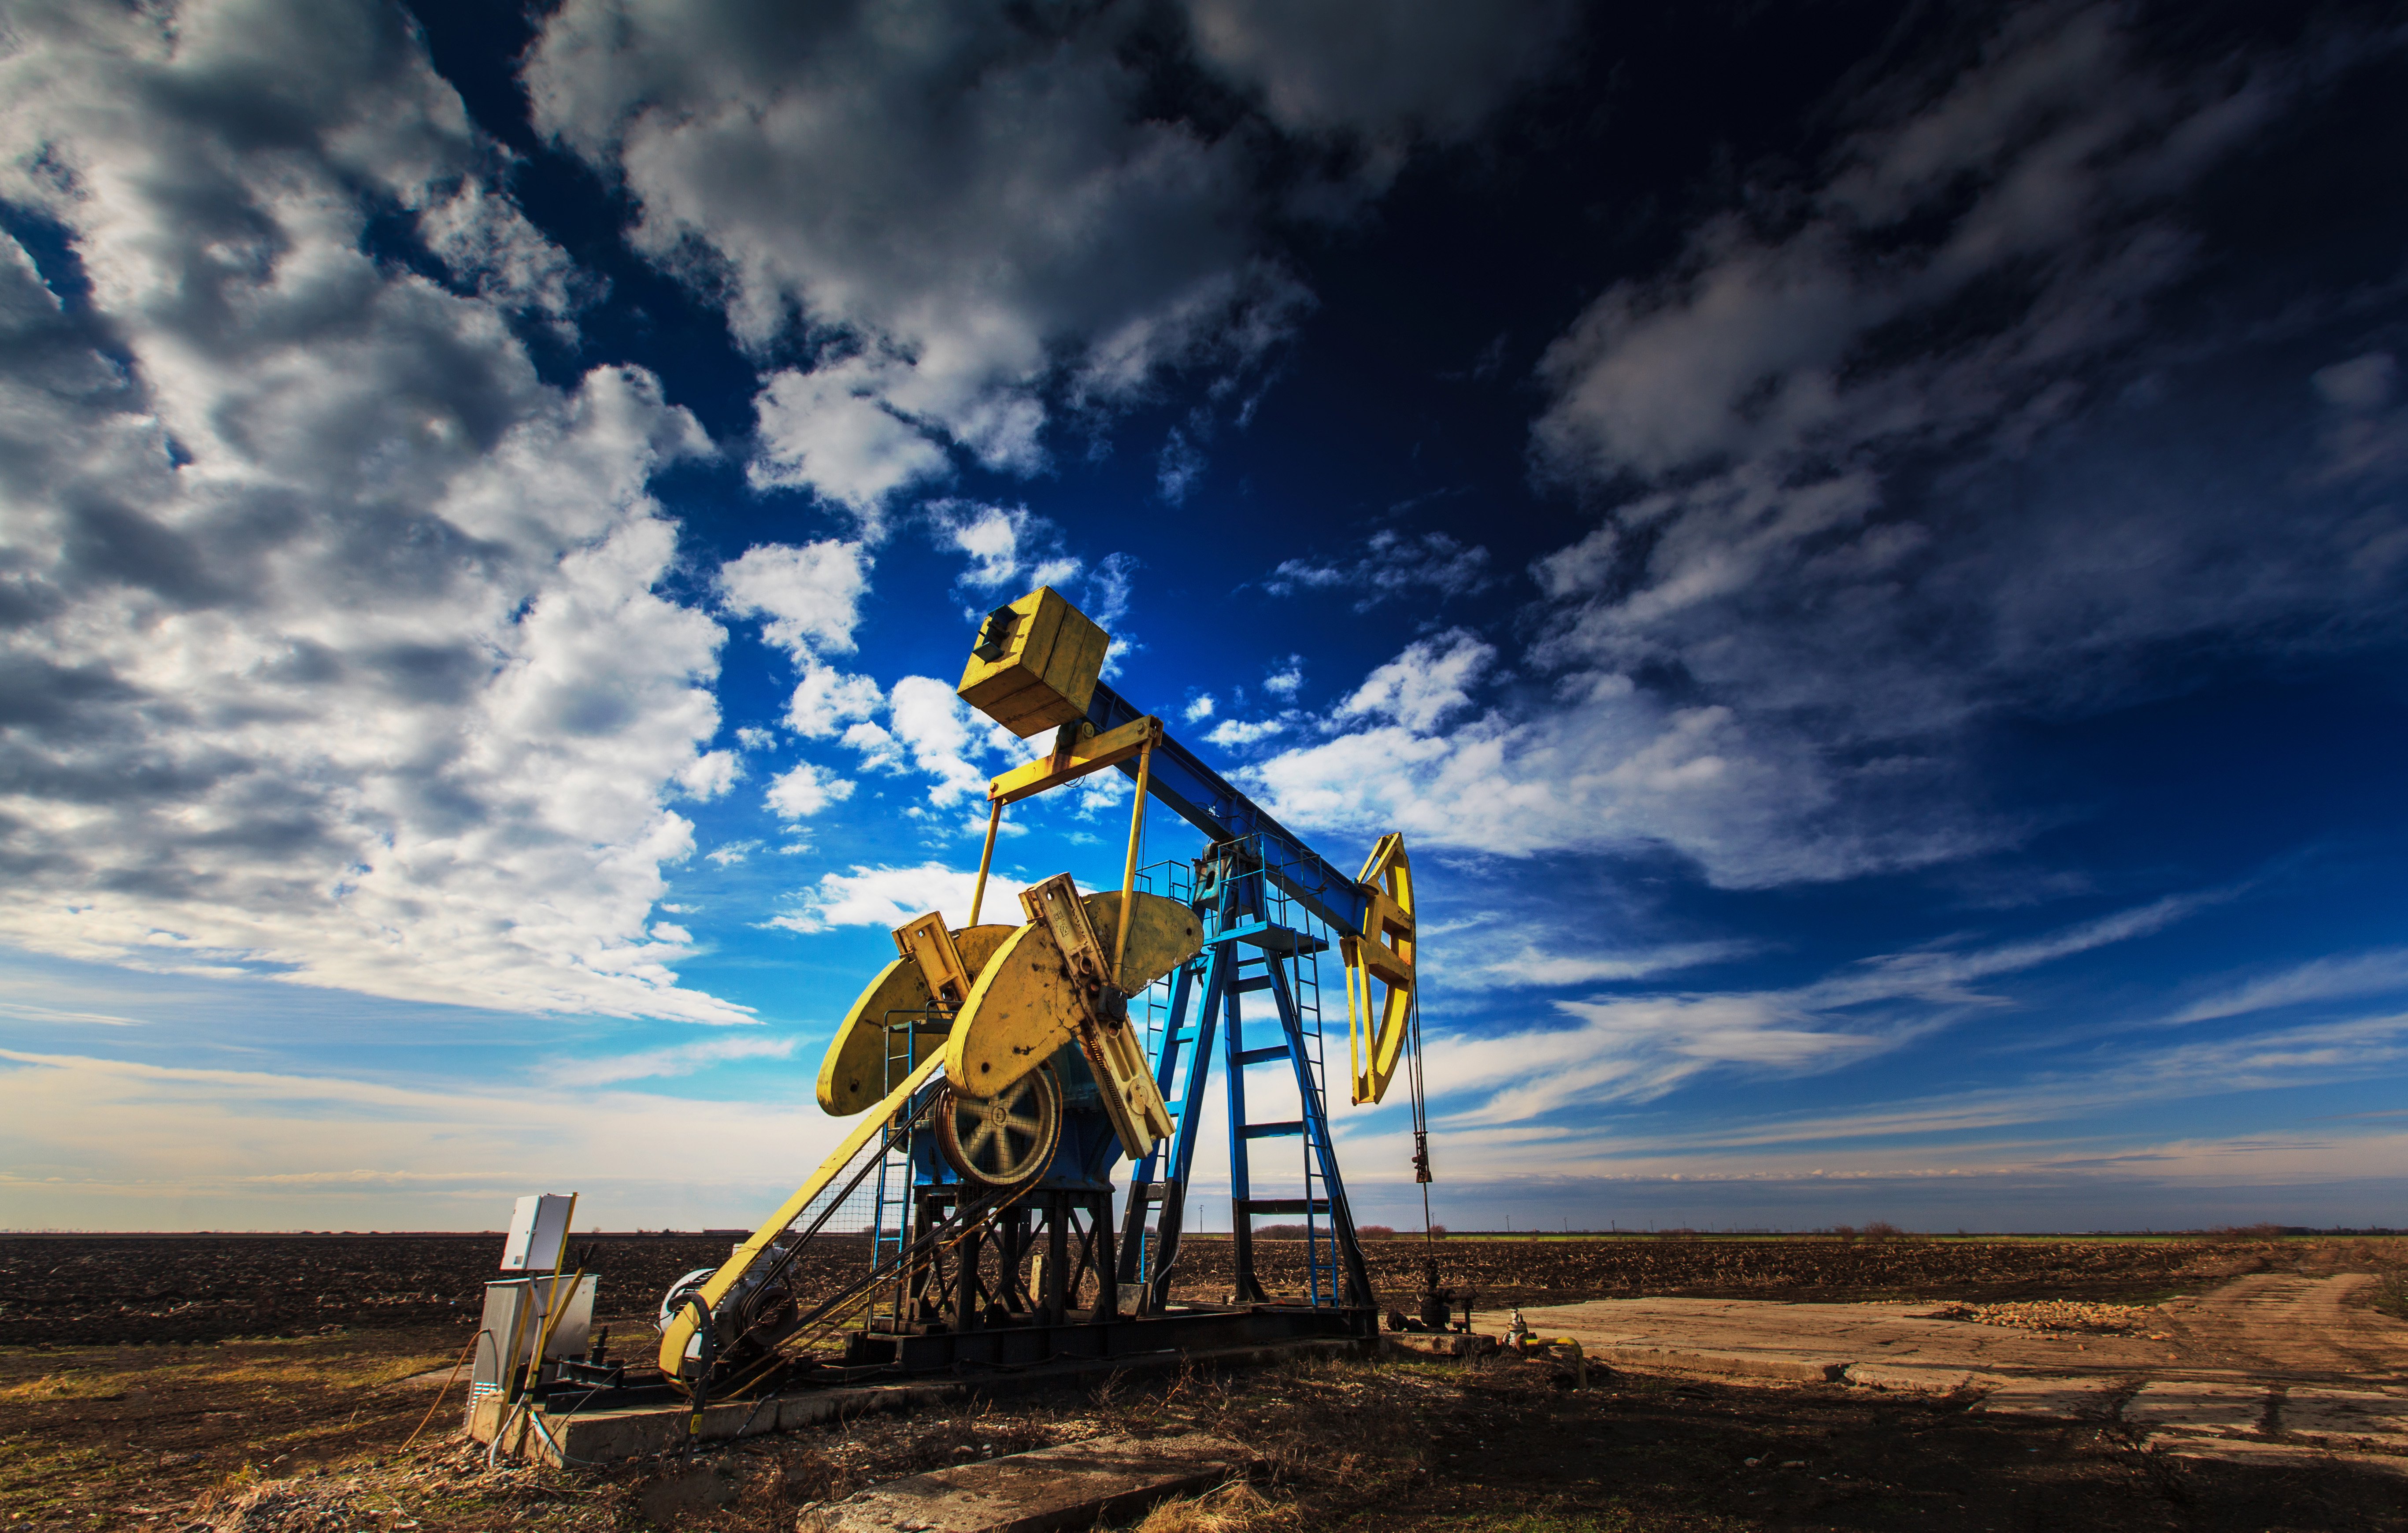 The Role of Renewable Energy in Reducing the Need for Oil Drilling